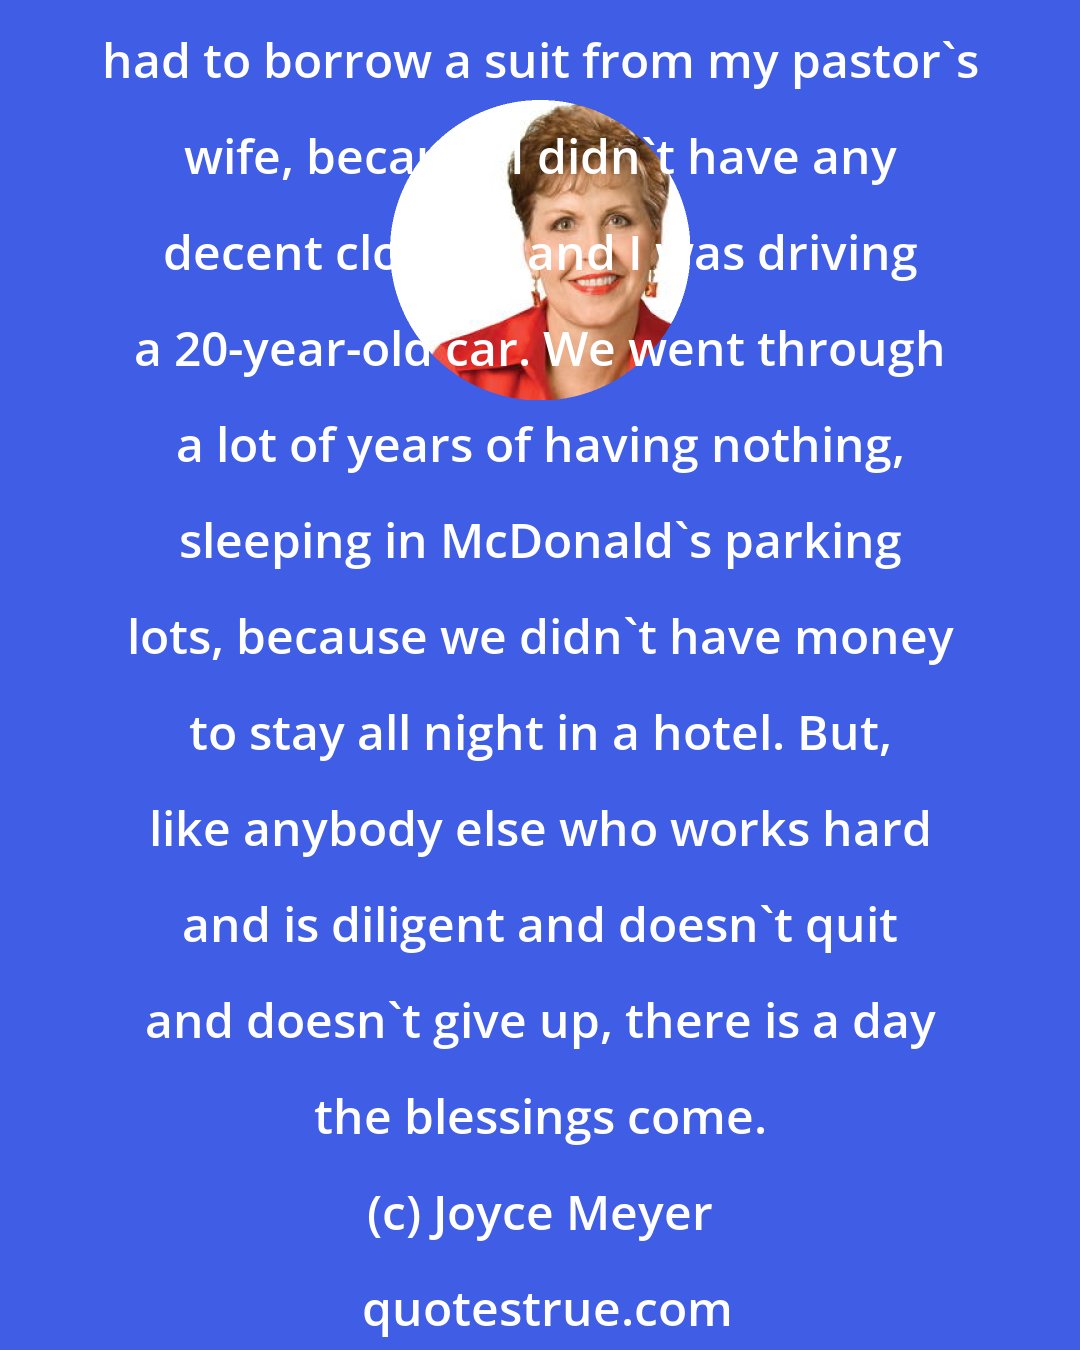 Joyce Meyer: God has blessed me in many ways. Money is not the greatest blessing you can have, but I literally had absolutely nothing. The first message that I preached at Life in the Word, I had to borrow a suit from my pastor's wife, because I didn't have any decent clothes, and I was driving a 20-year-old car. We went through a lot of years of having nothing, sleeping in McDonald's parking lots, because we didn't have money to stay all night in a hotel. But, like anybody else who works hard and is diligent and doesn't quit and doesn't give up, there is a day the blessings come.